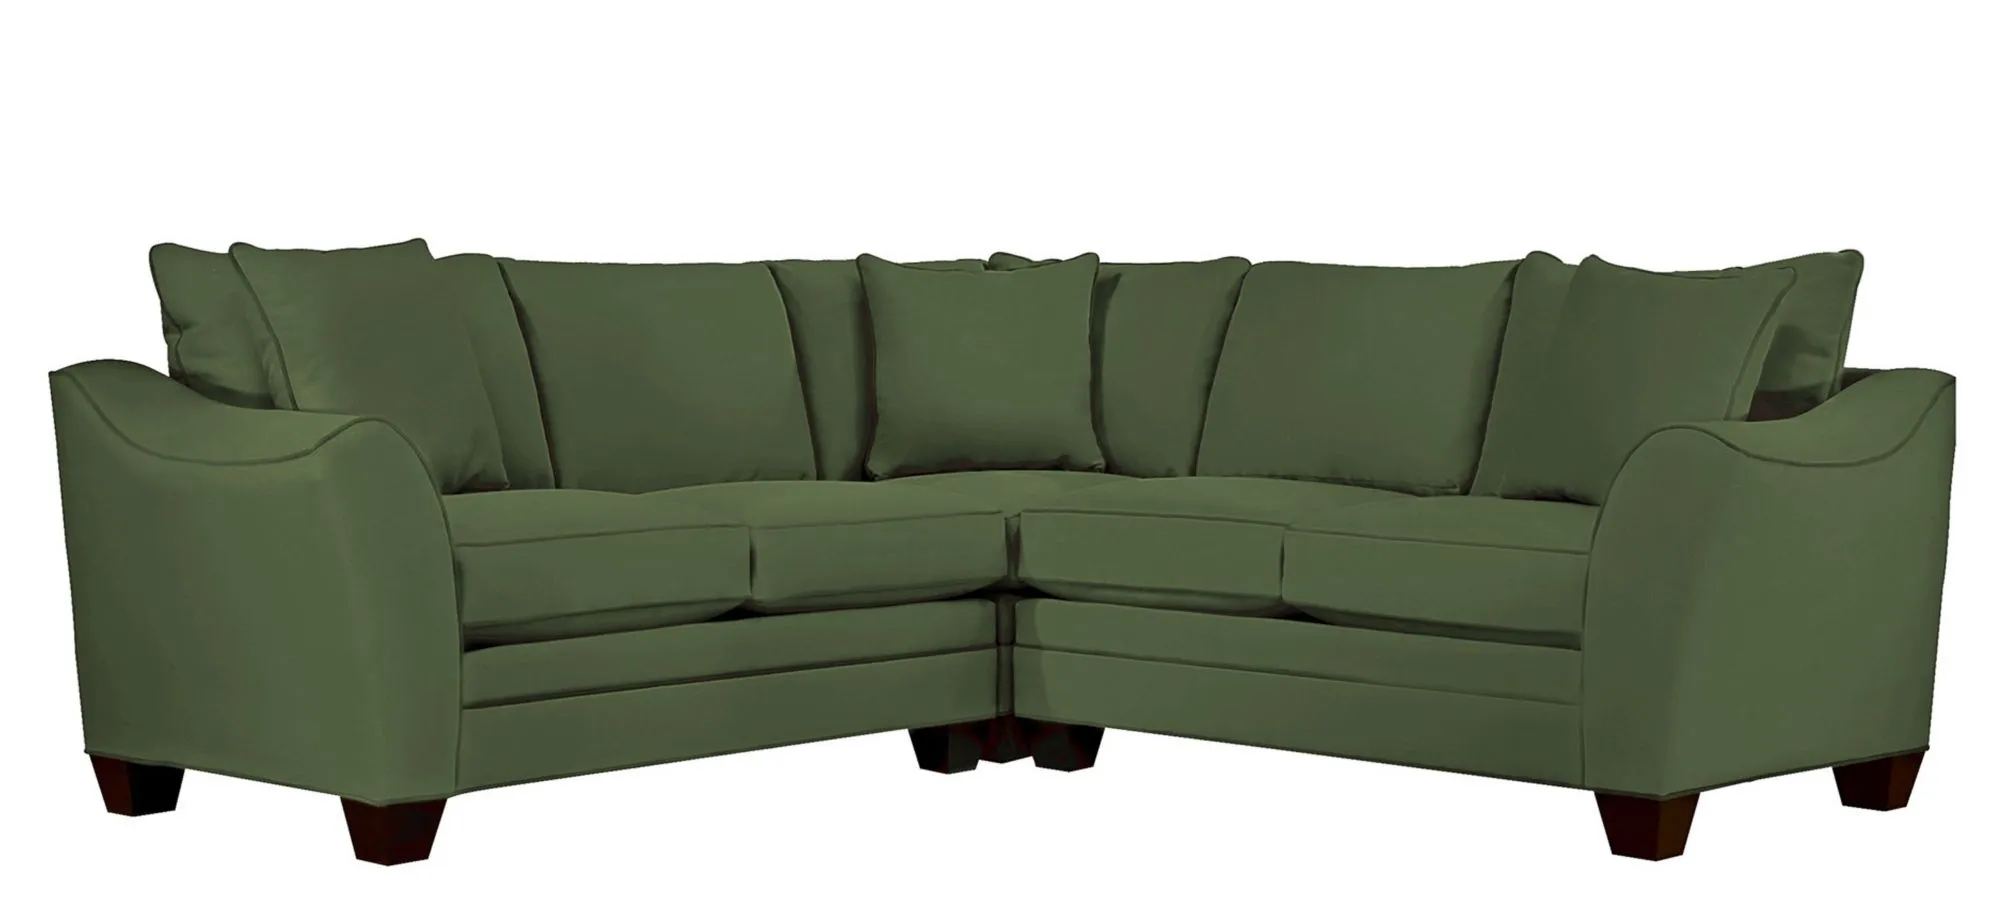 Foresthill 3-pc. Symmetrical Loveseat Sectional Sofa in Suede So Soft Pine by H.M. Richards